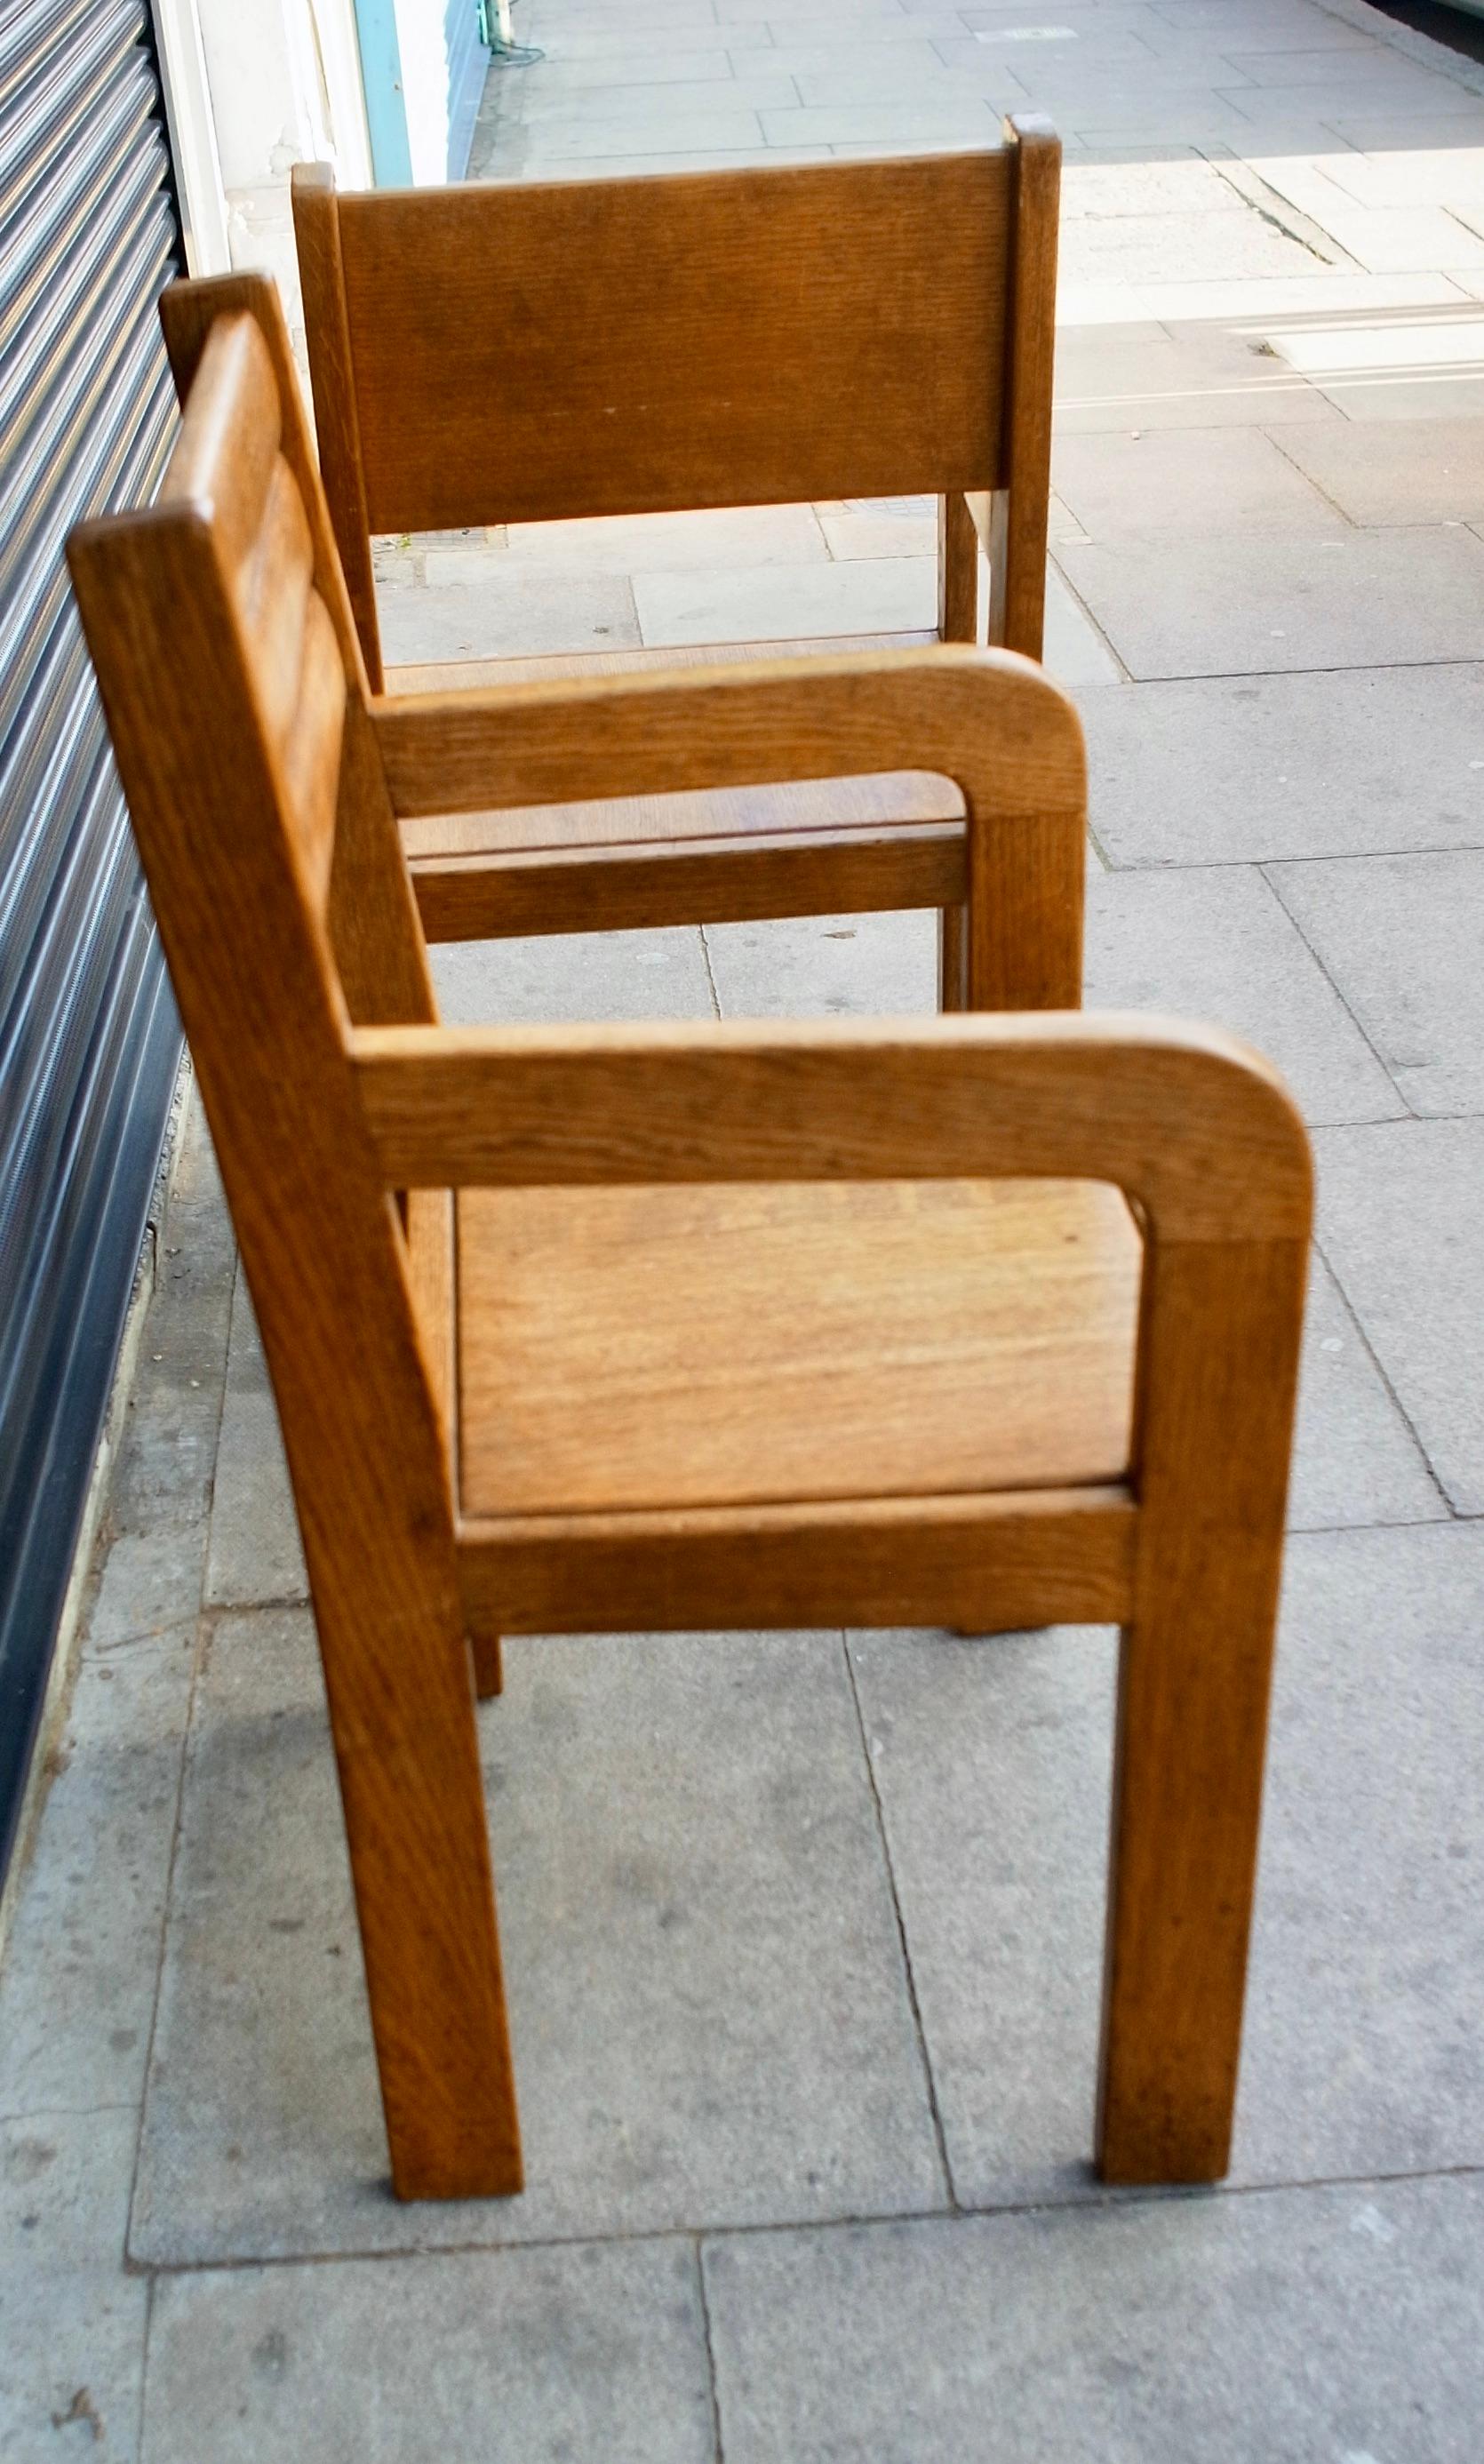 Pair of 1940s Handmade English Oak Vintage Carver/Side Chairs For Sale 4